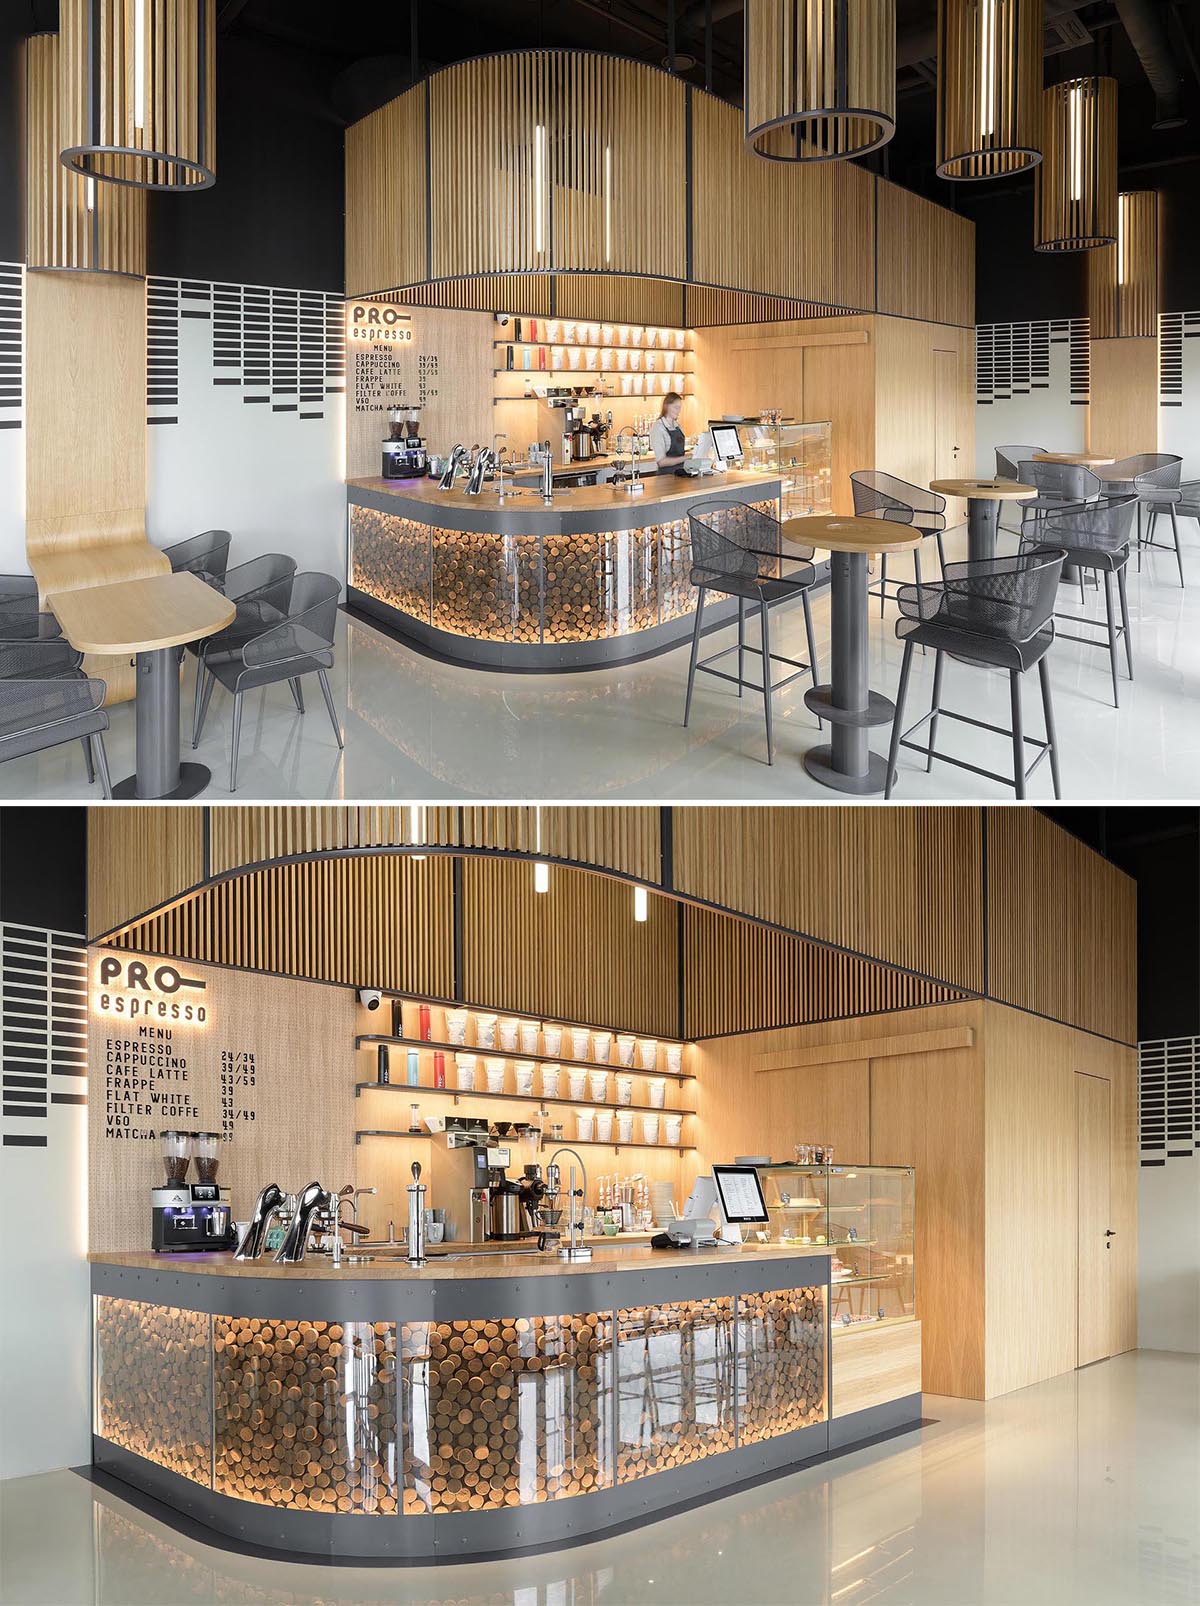 A service bar showcases the coffee machines, while the curved design complements the table designs and the column shaped lights hanging from the ceiling.